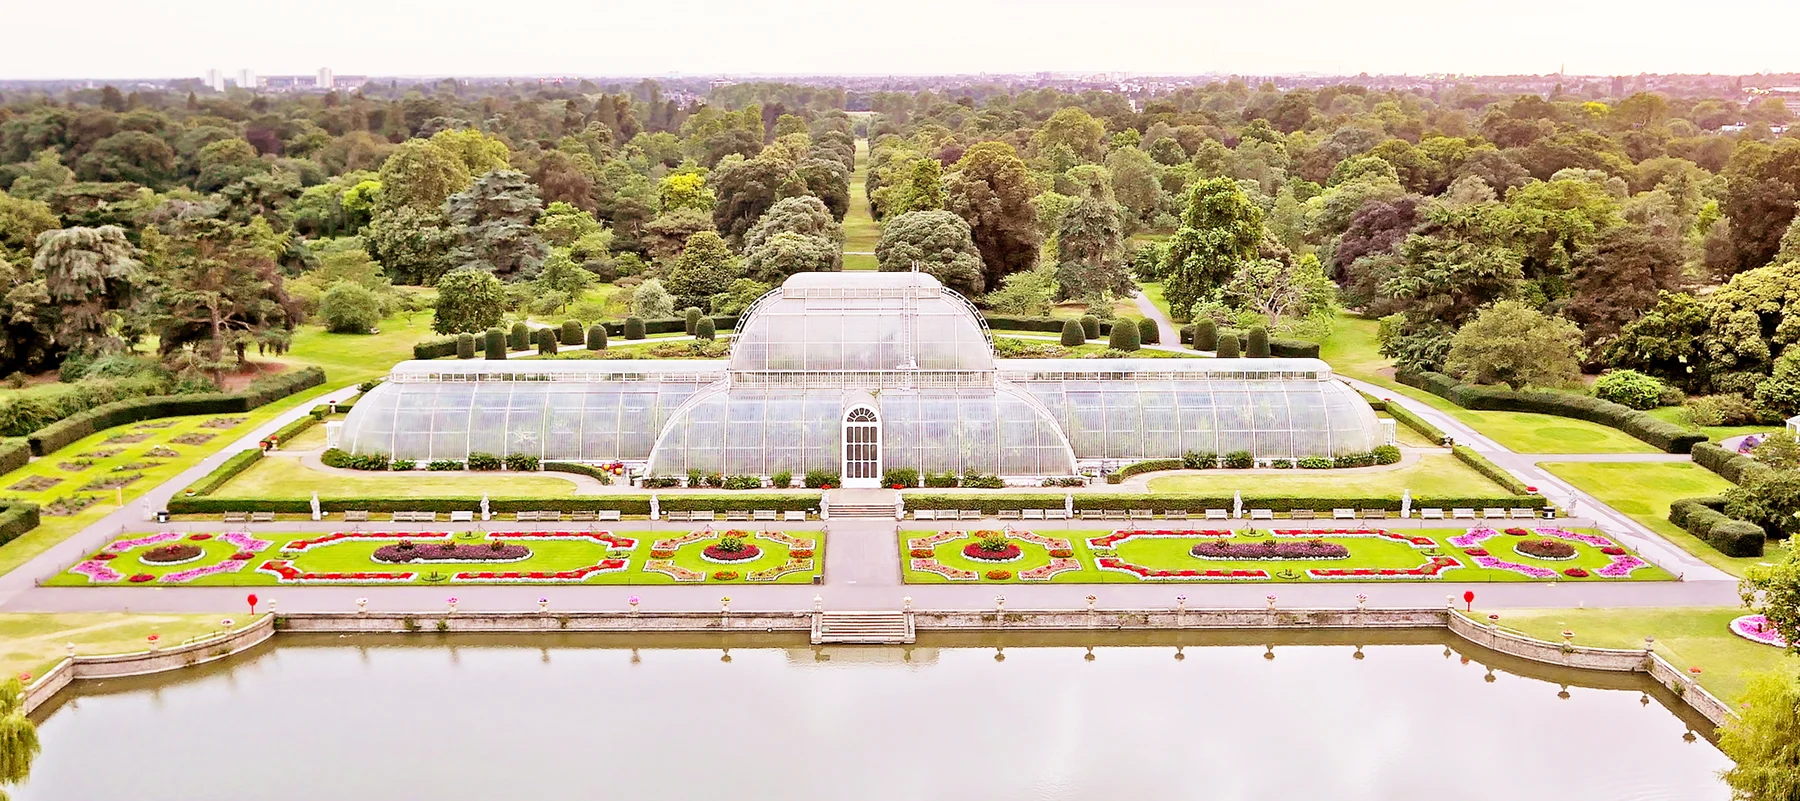 A daytime aerial view of the huge greenhouse at Kew Gardens.